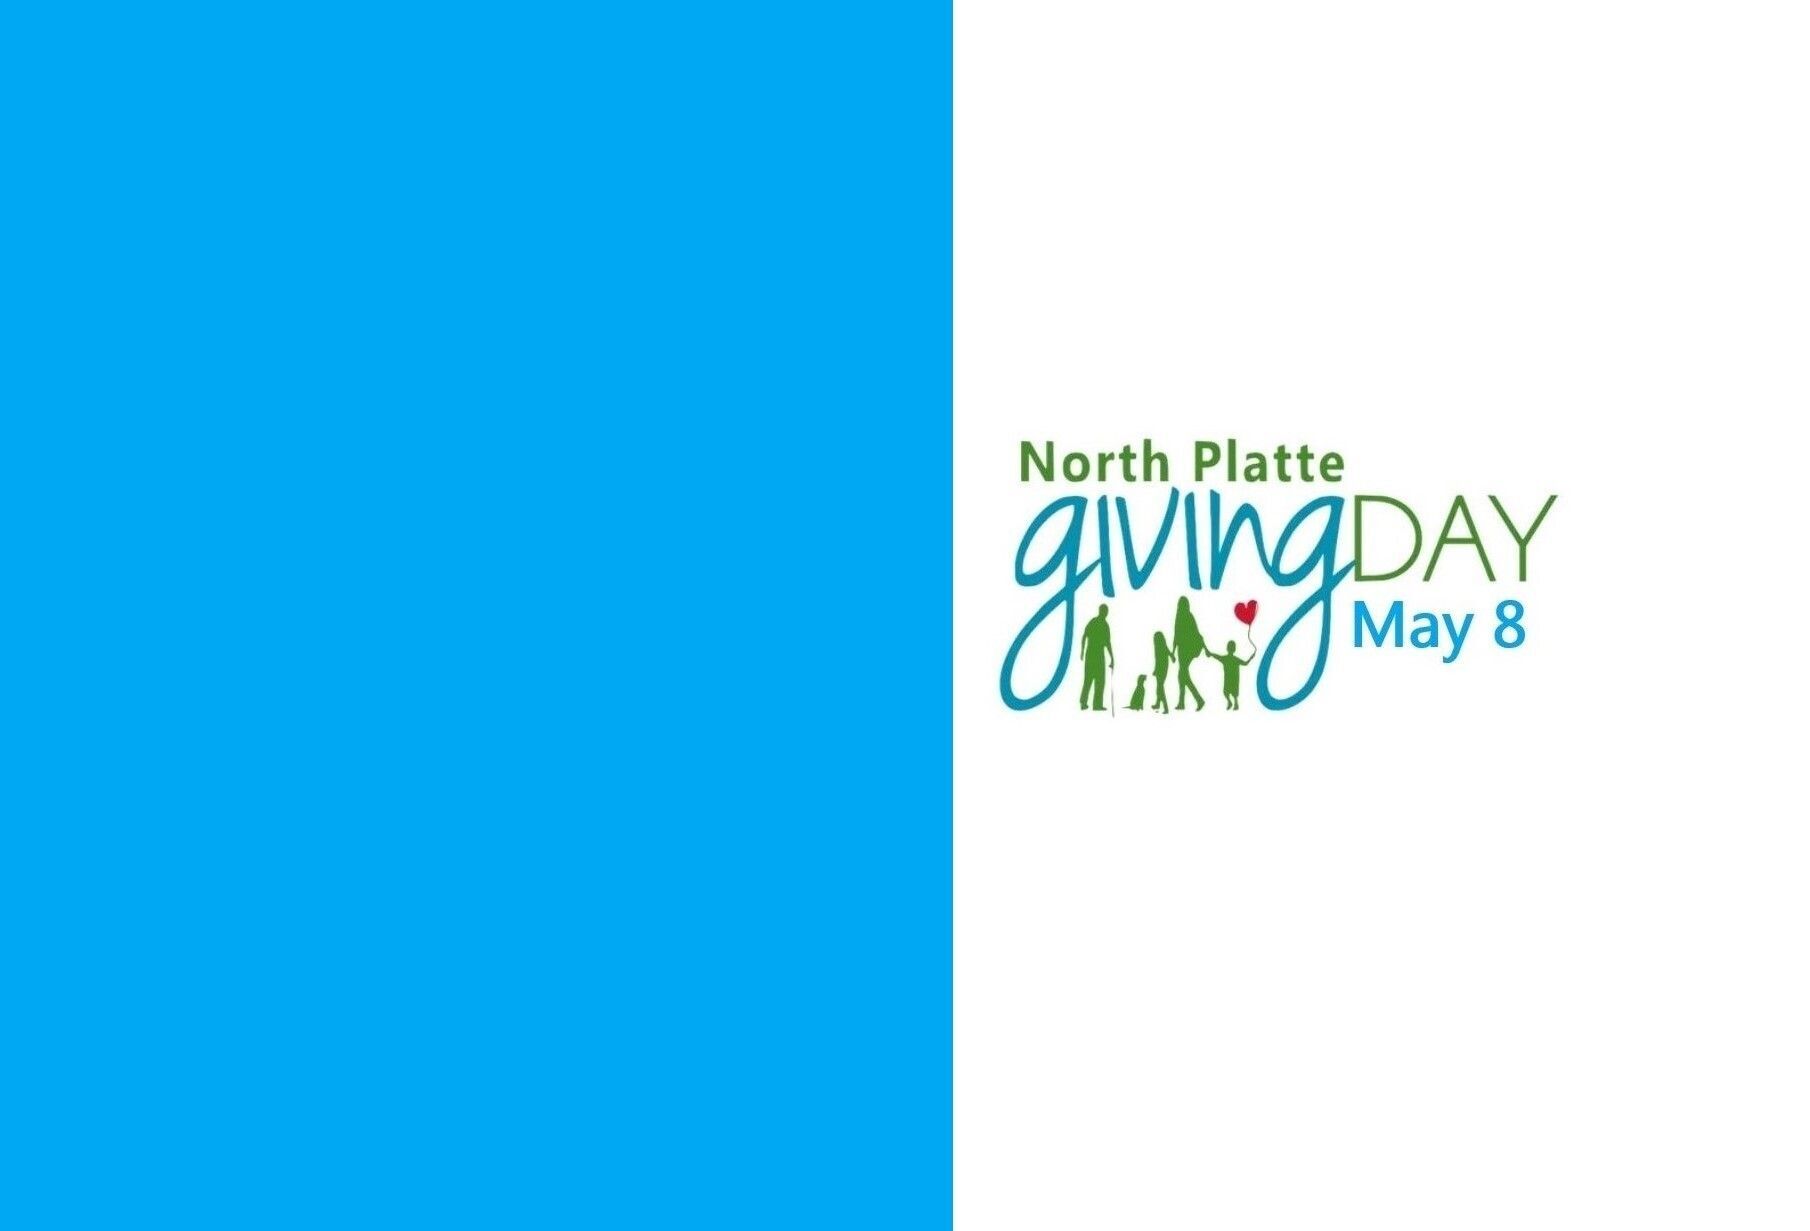 North Platte Giving Day